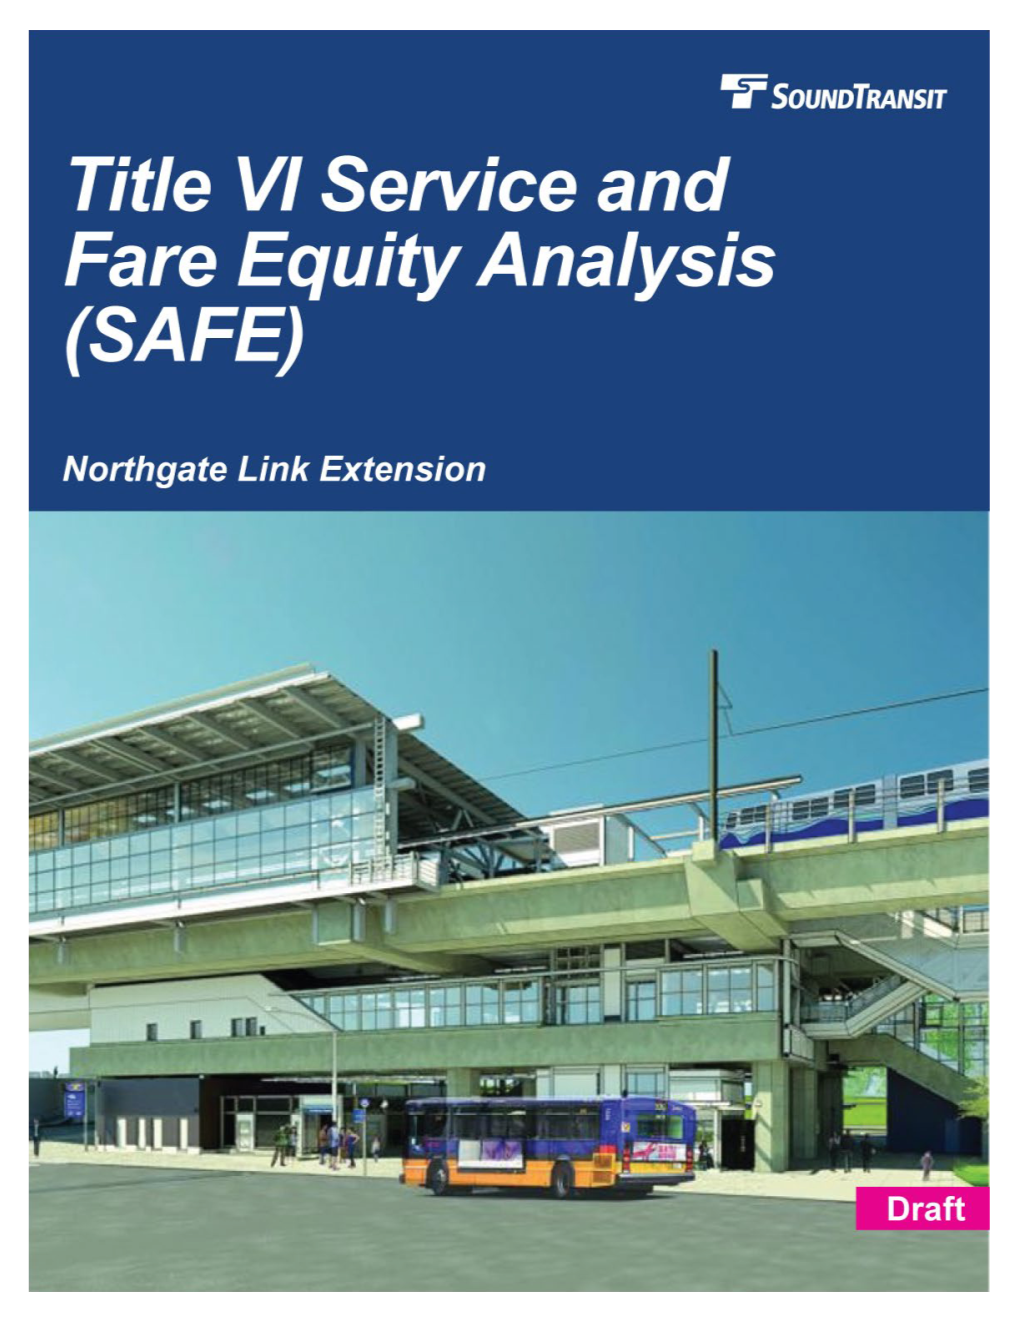 Northgate Title VI Service and Fare Equity Analysis